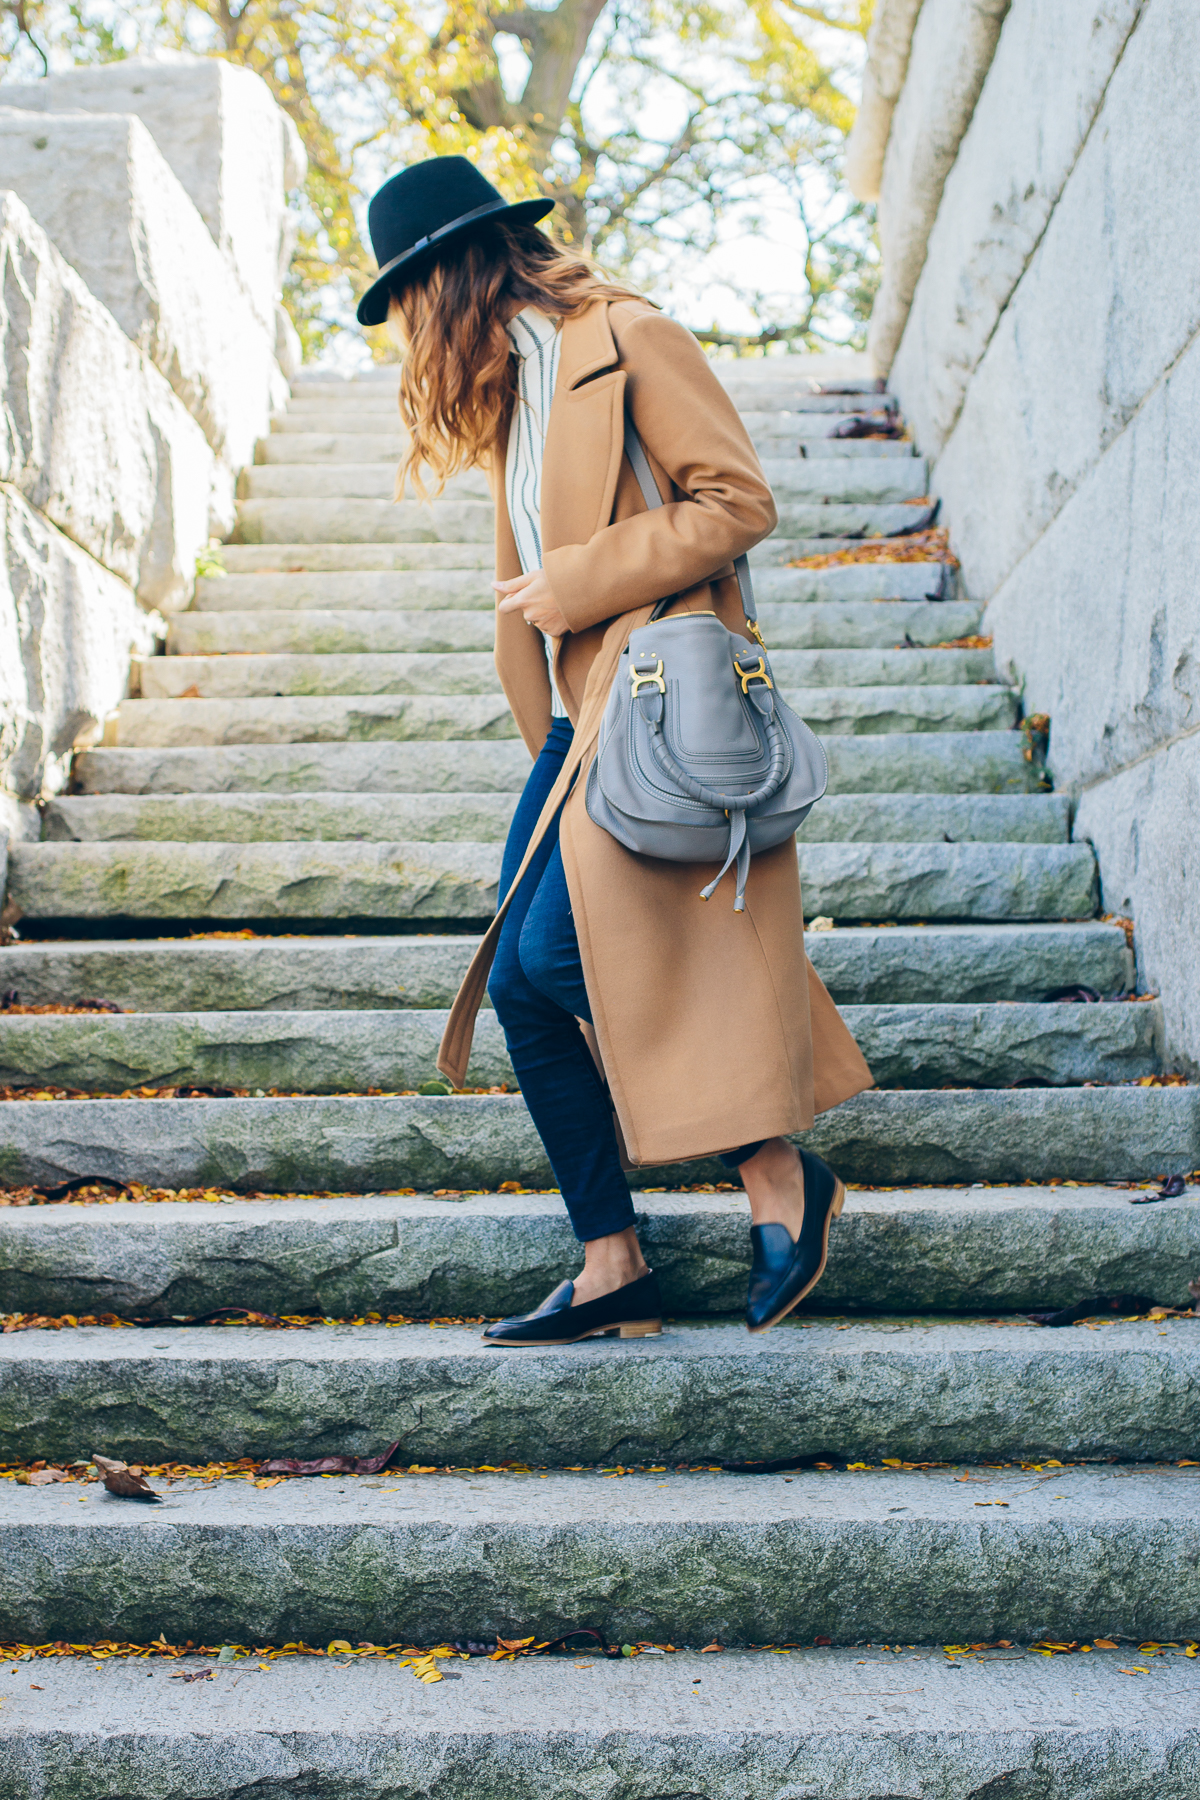 fall outfit, camel coat, felt hat, chic loafers — via @TheFoxandShe